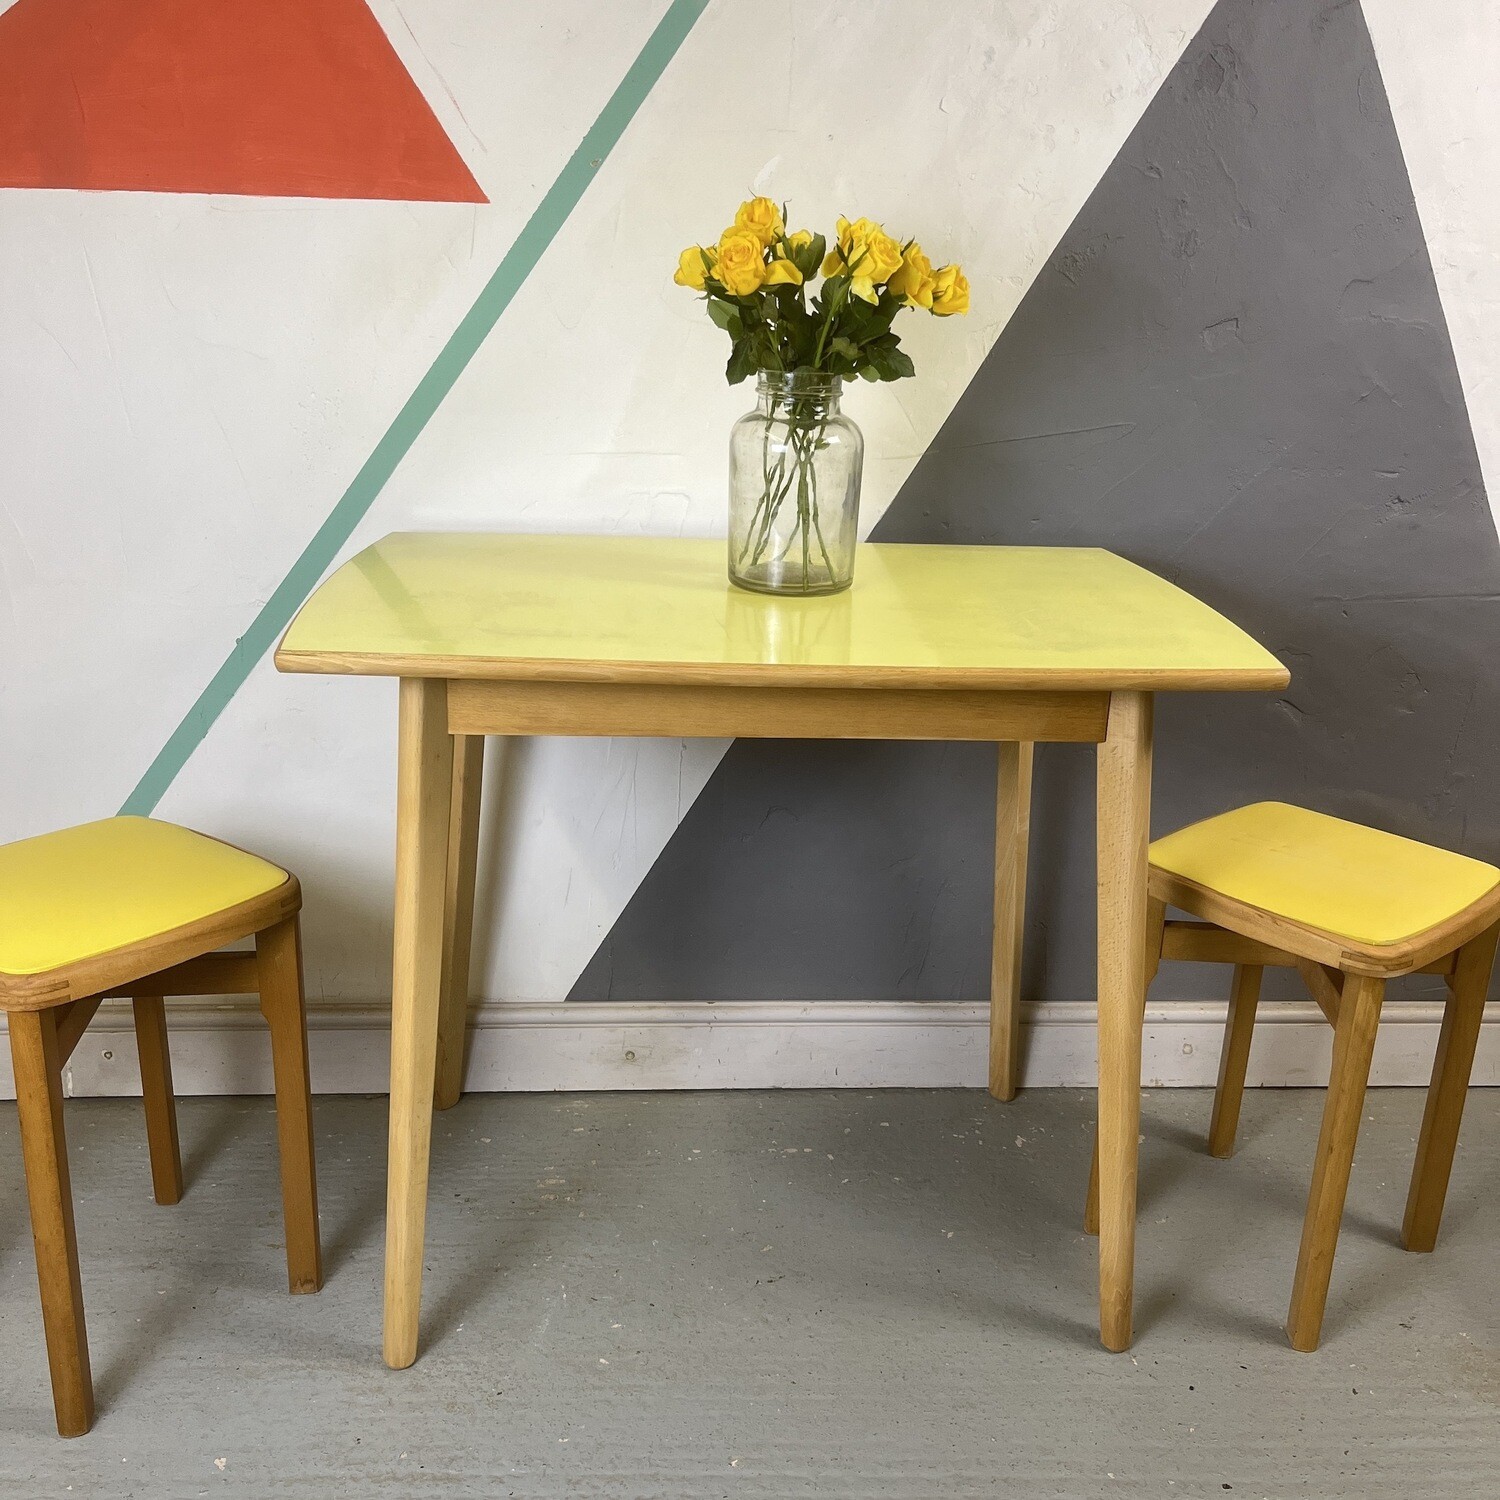 Vintage Yellow Formica Kitchen Dining Table Desk Restored